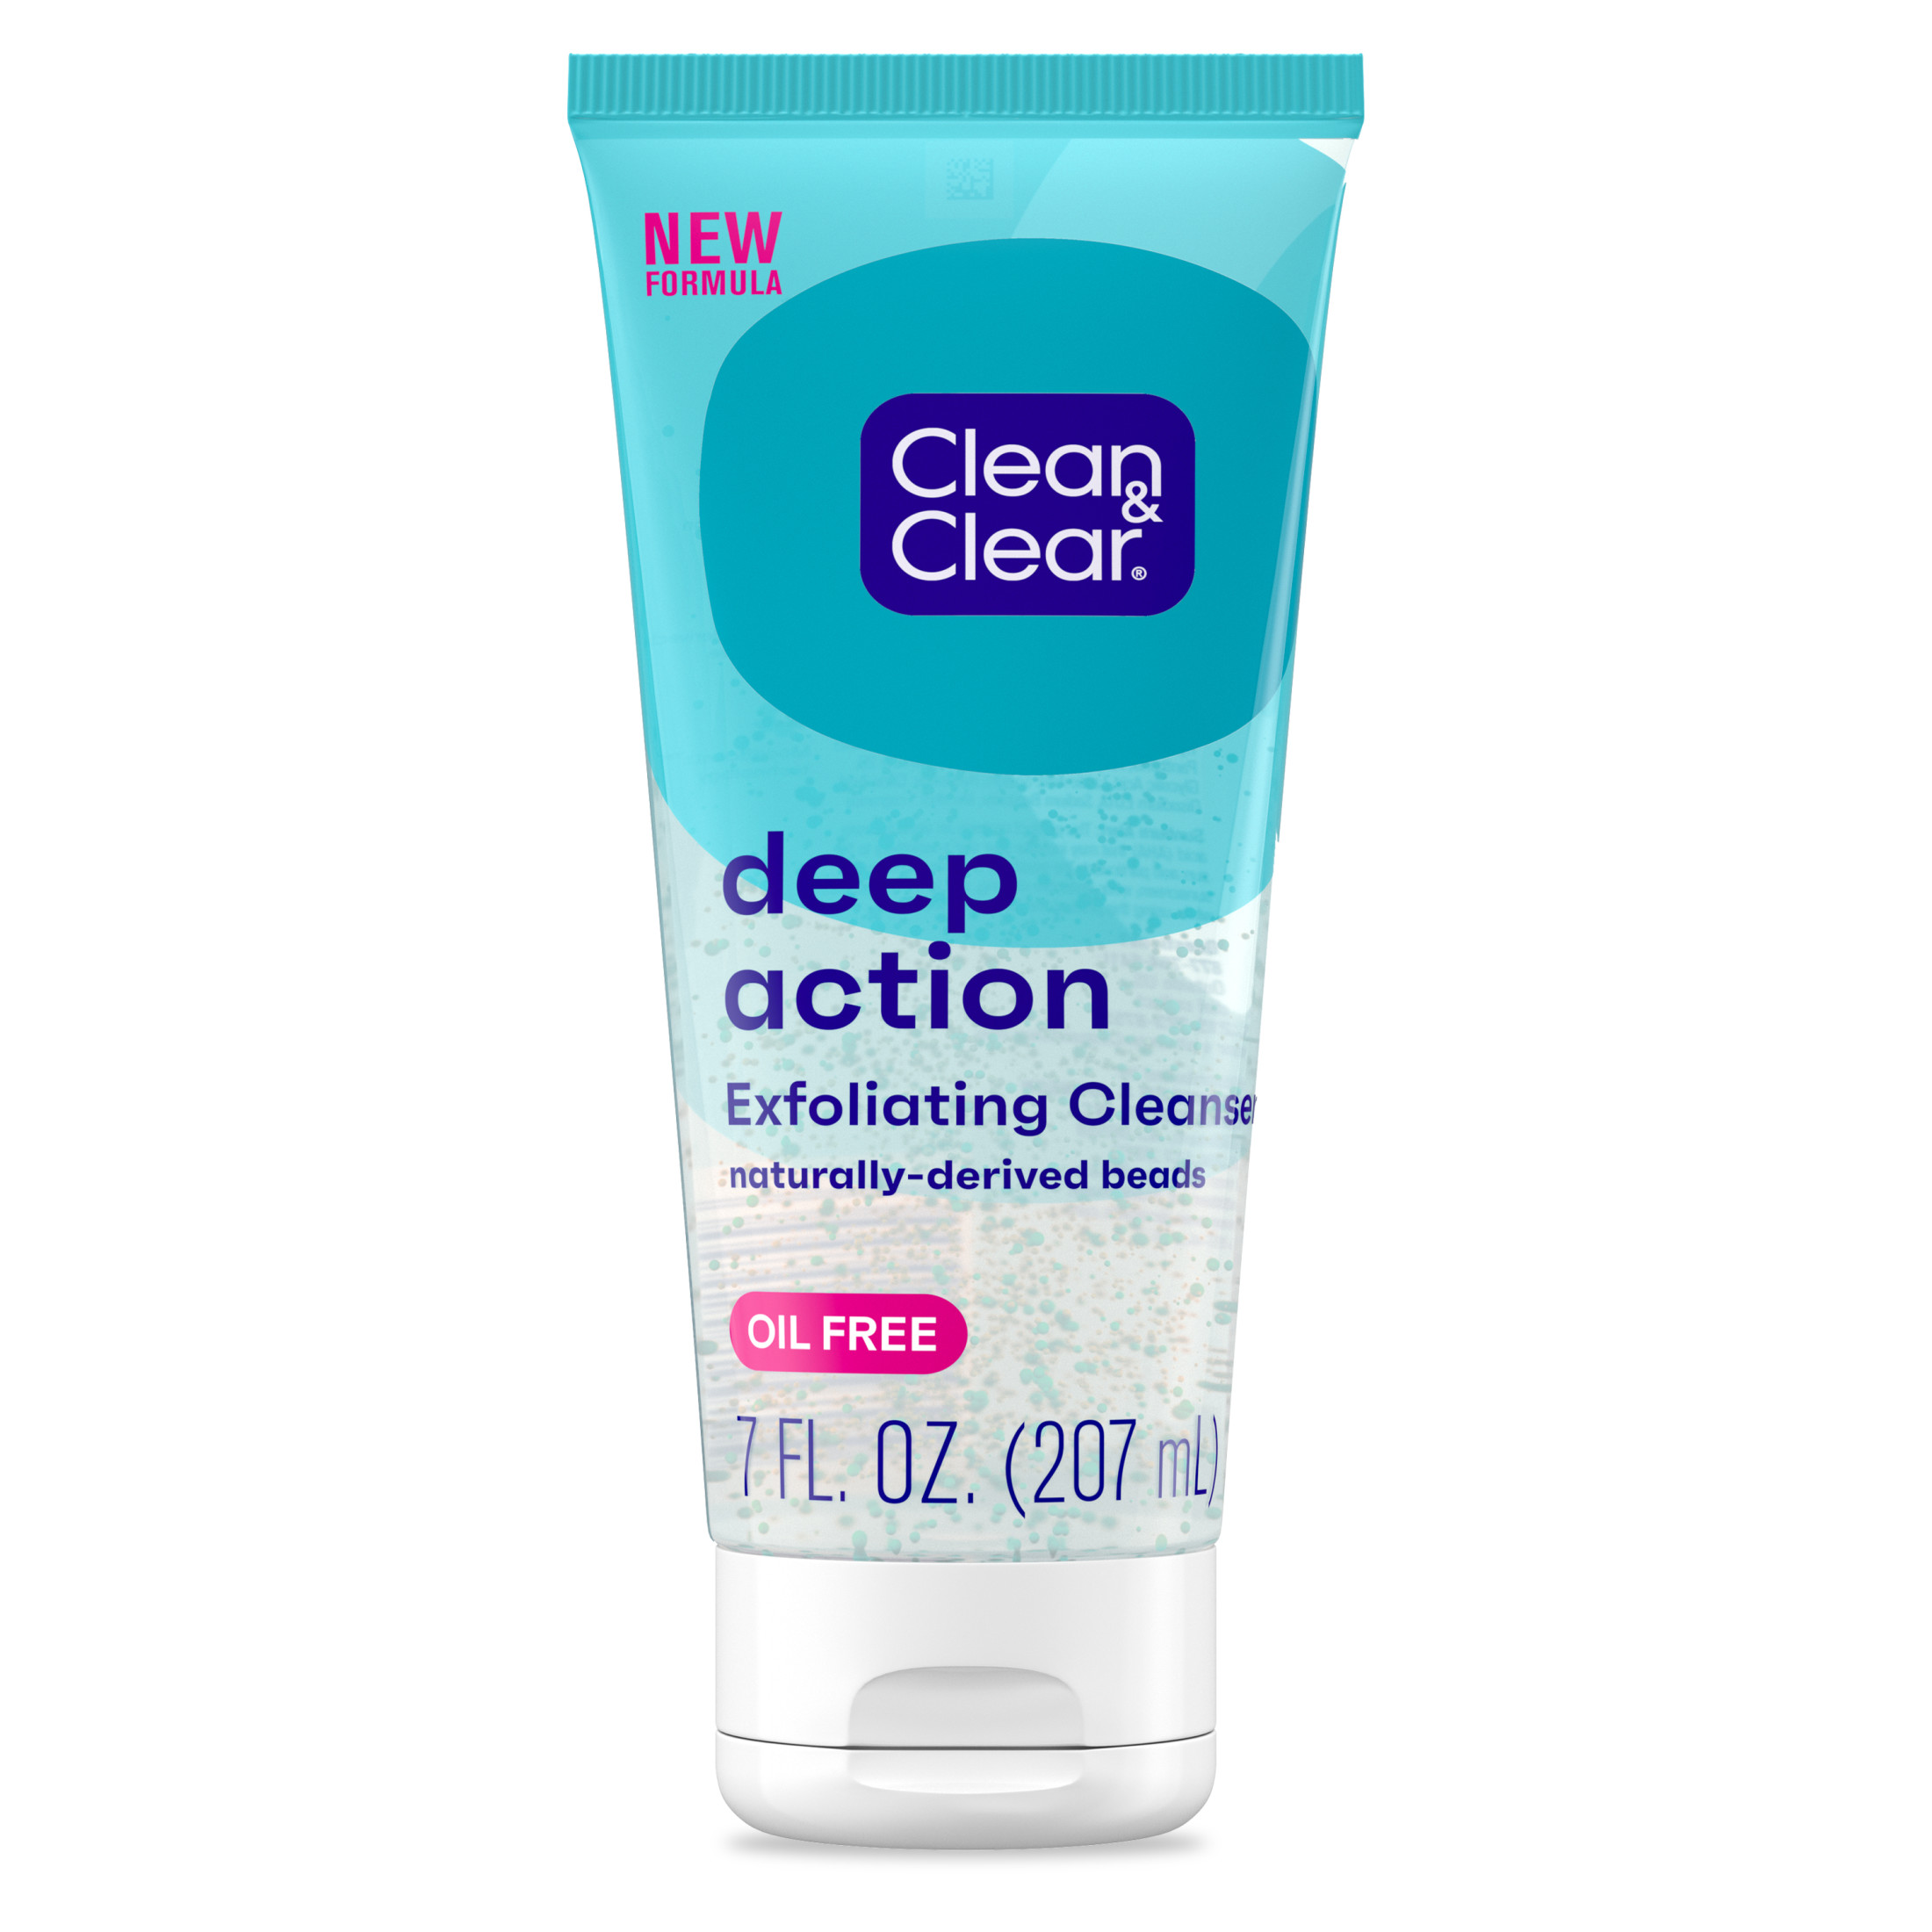 Clean Clear Oil-Free Deep Action Exfoliating Acne Face Scrub, Facial Cleanser and Wash, 7 oz - image 1 of 8